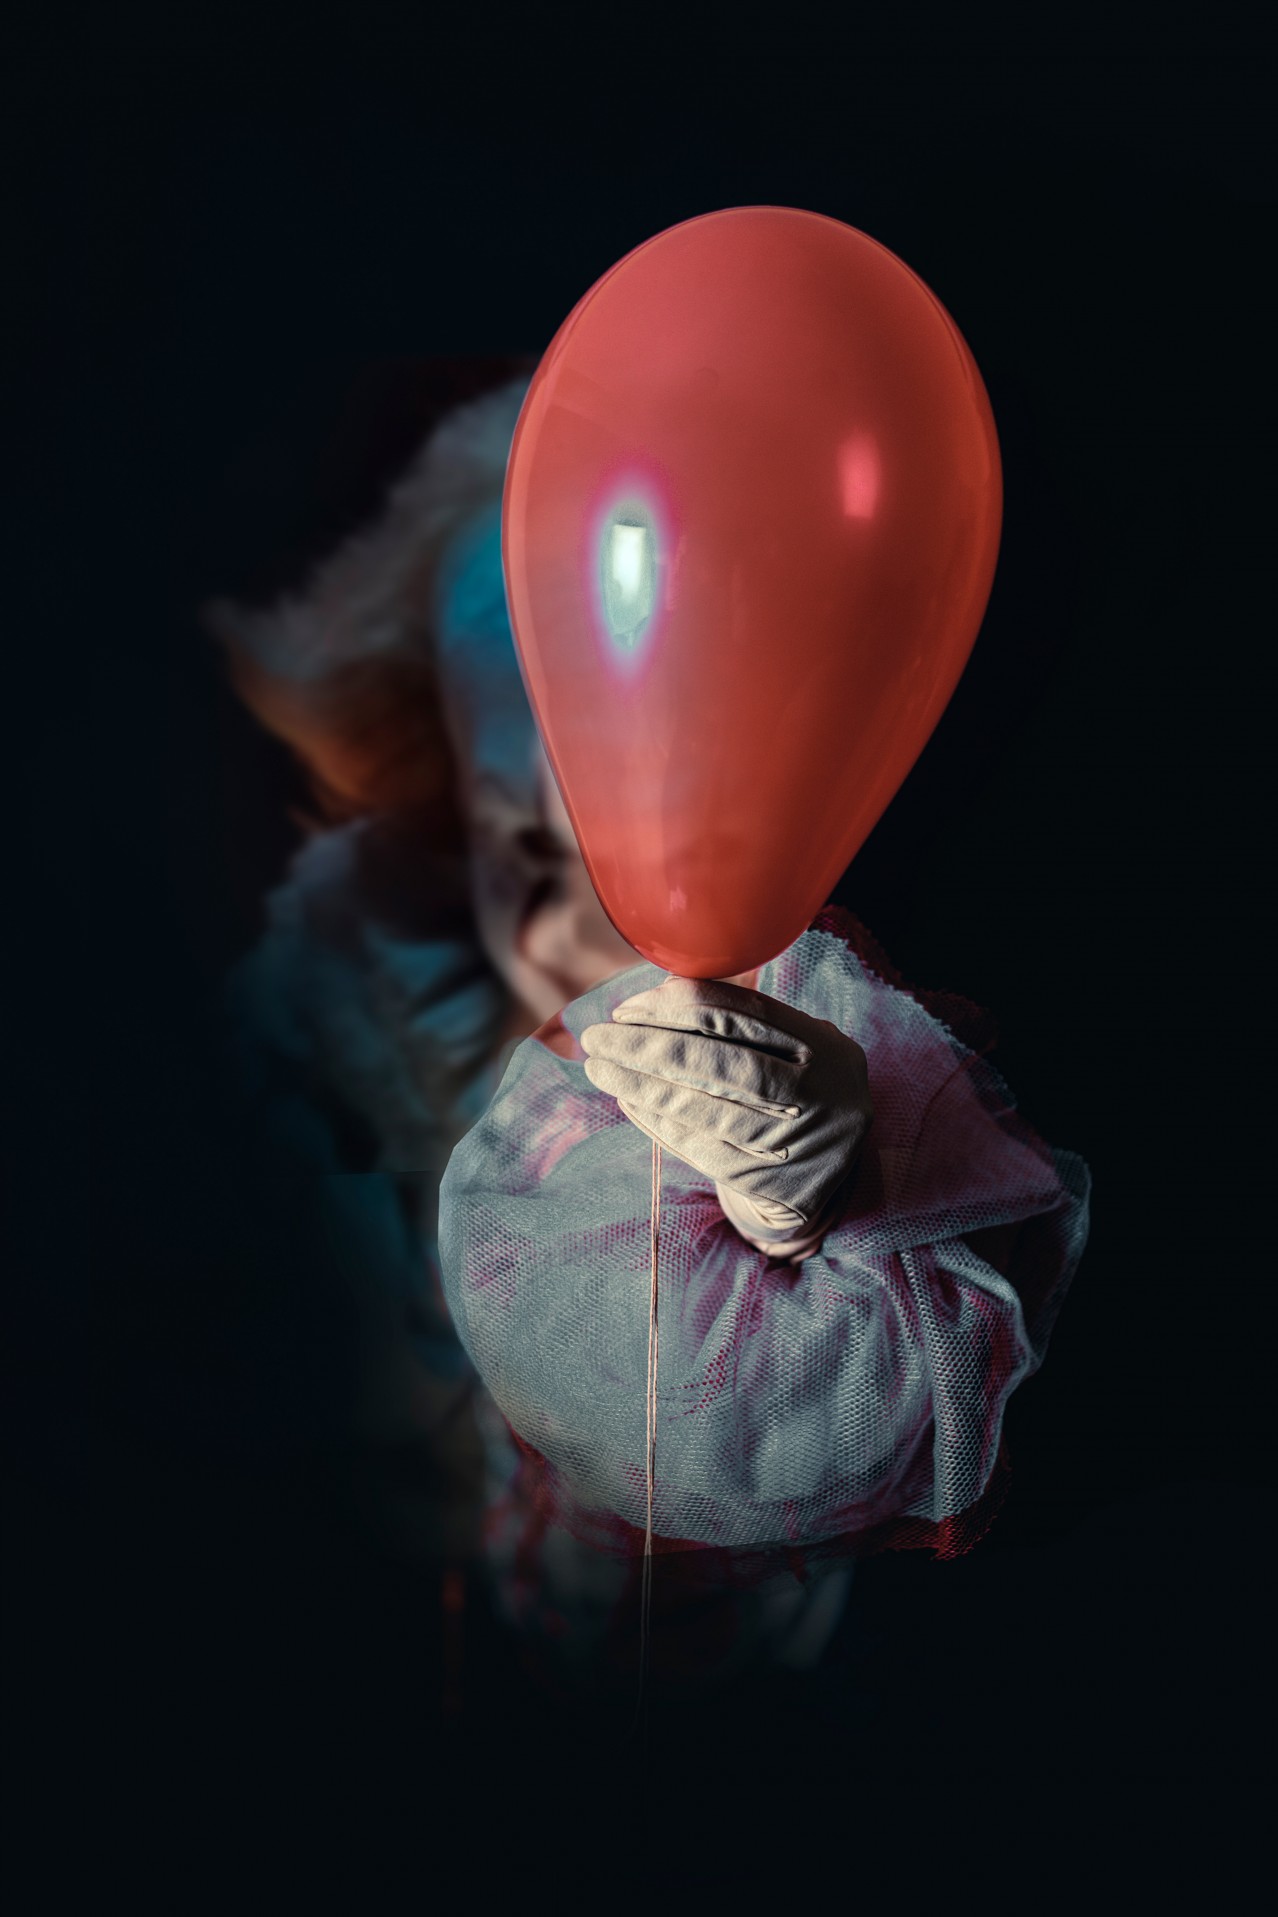 Pennywise holding red balloon in the dark